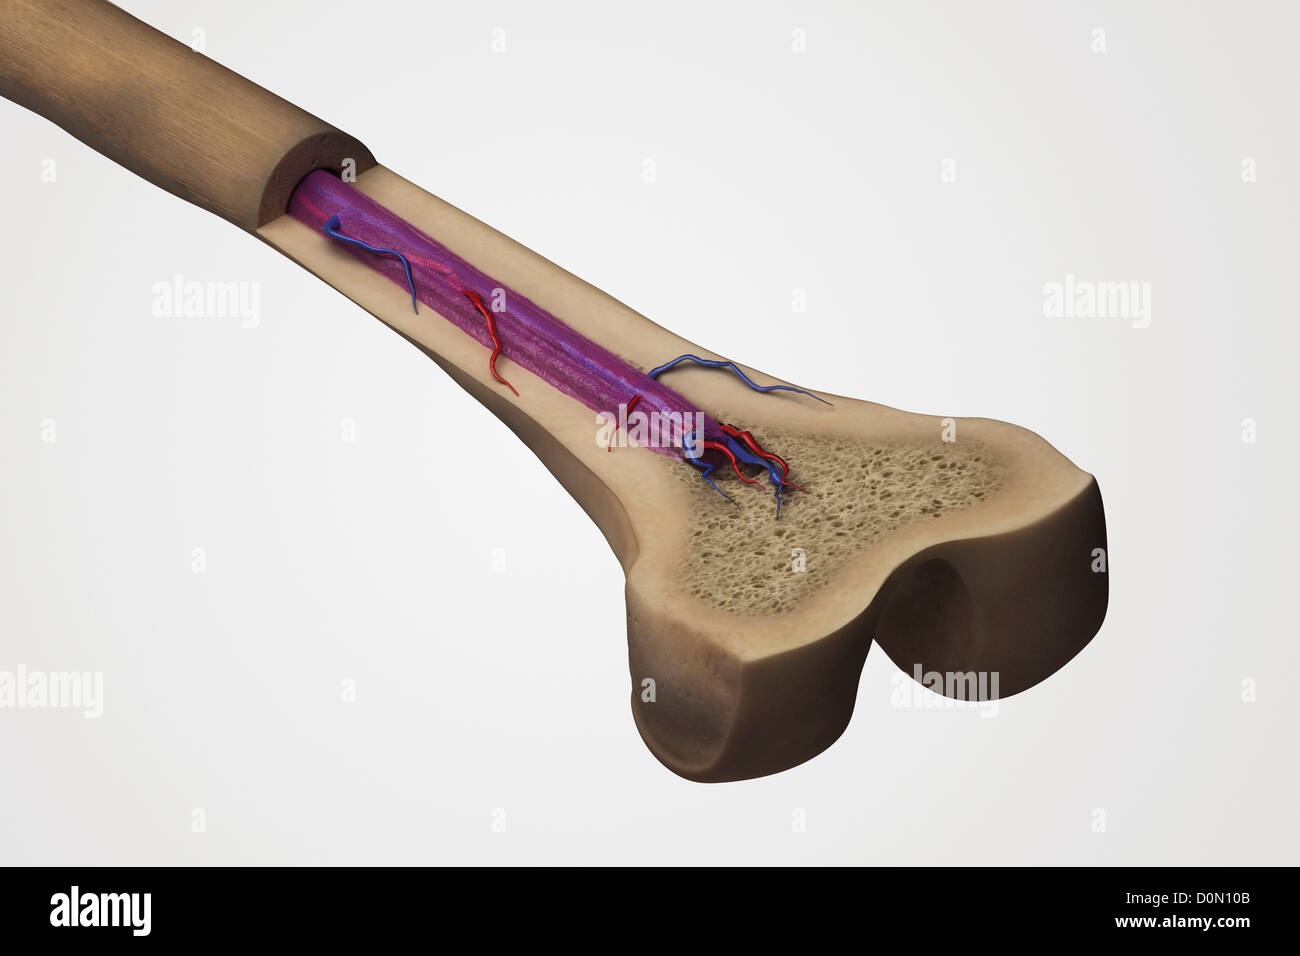 Cross section of a femur bone showing the anatomical structure including cancellous bone and marrow. Stock Photo